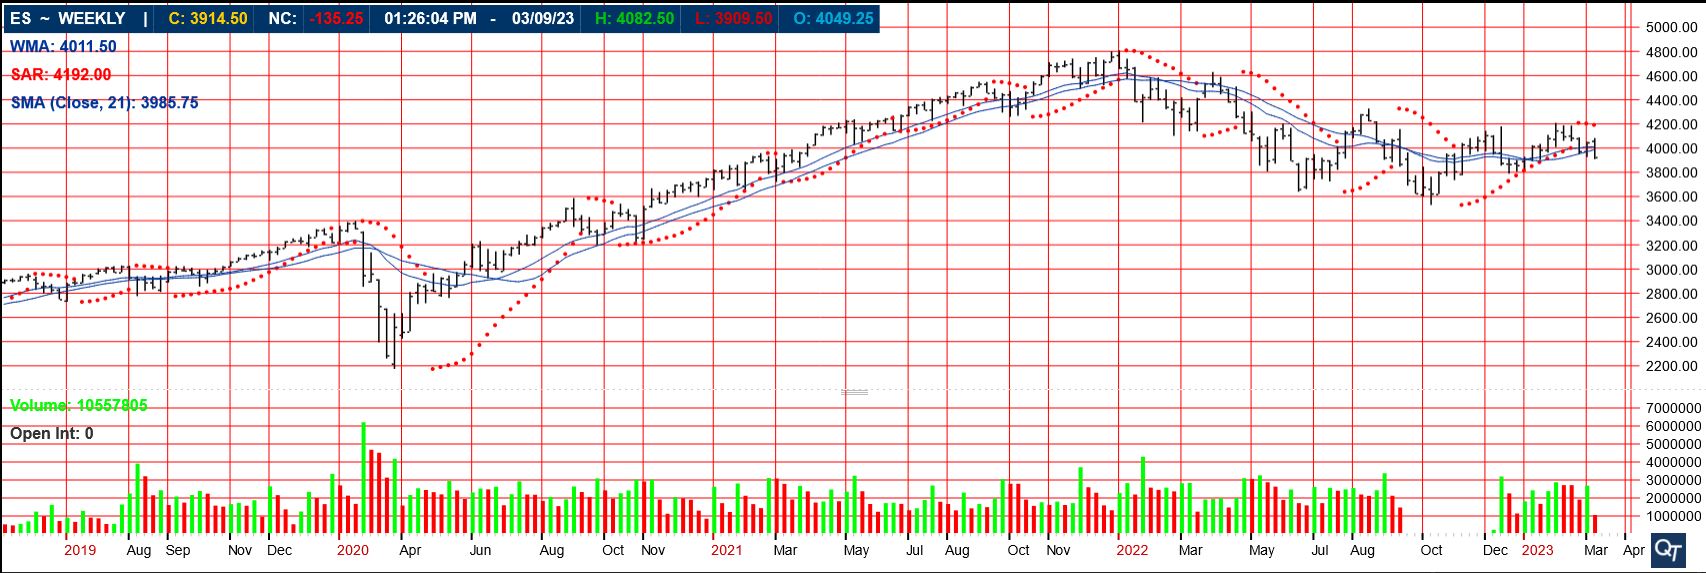 S&P 500 Index Futures Trading Chart updated October 14th, 2022